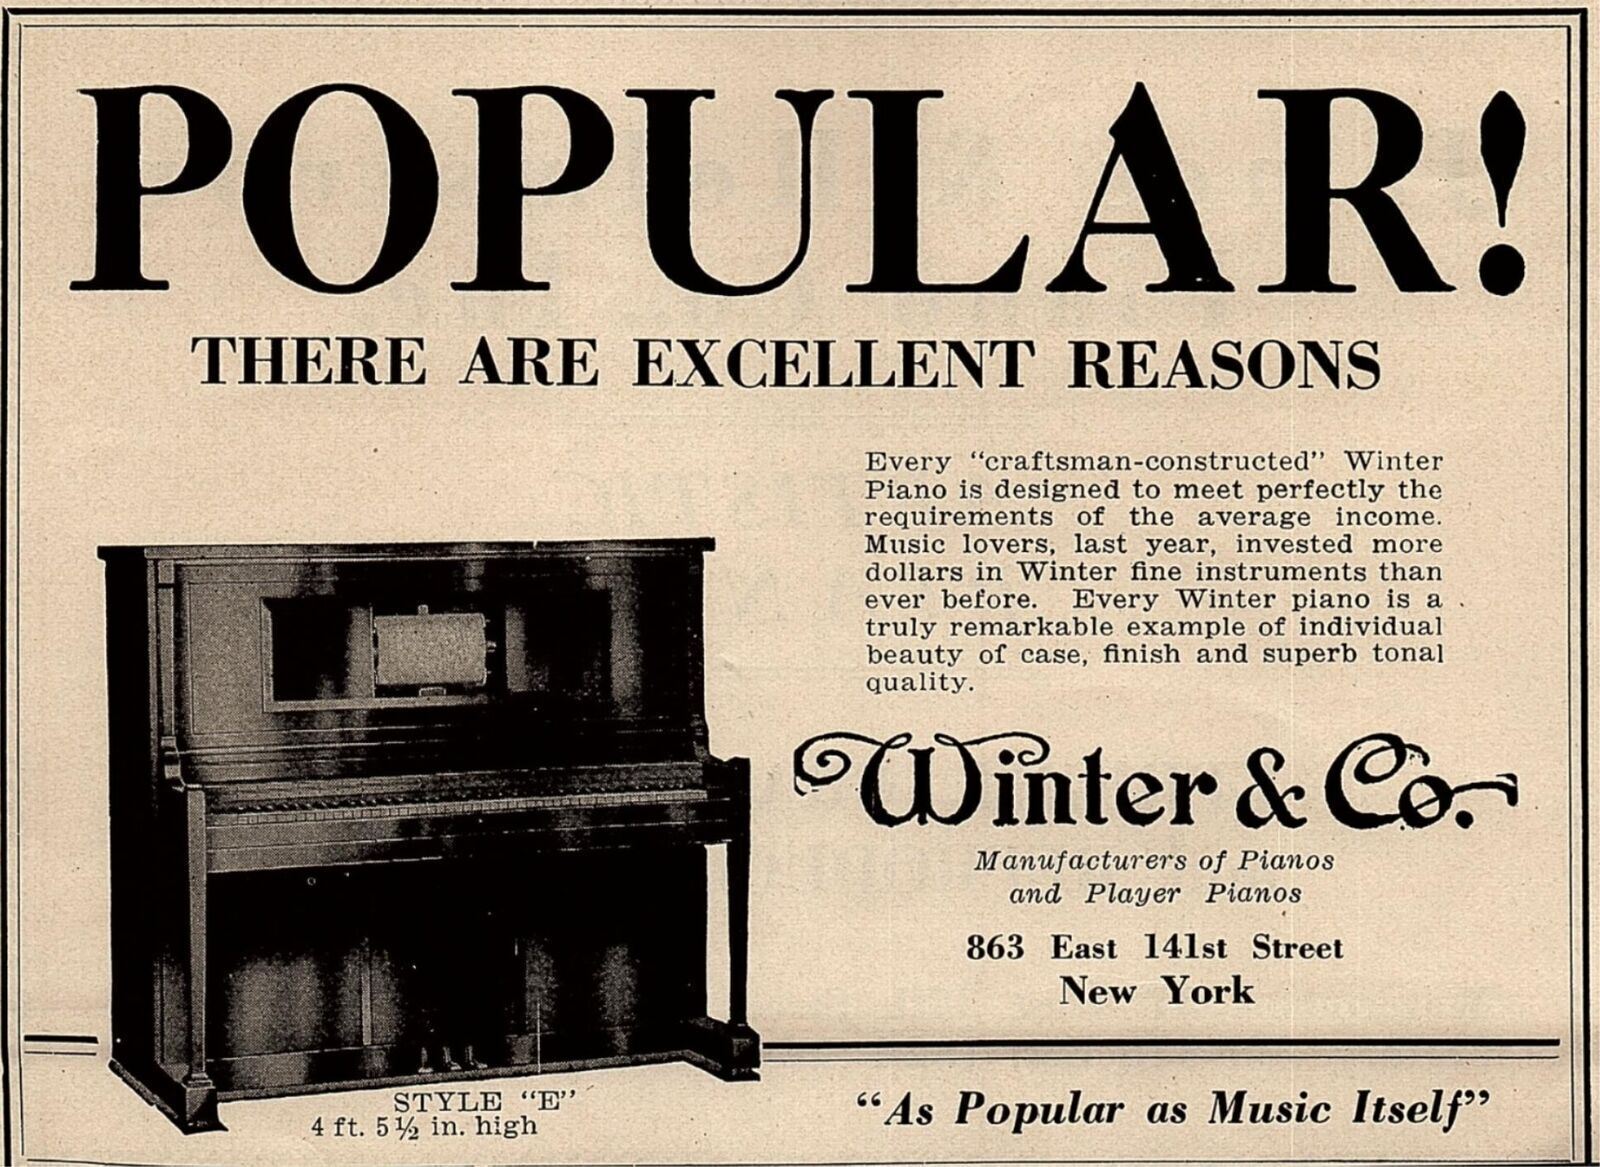 1927 WINTER & CO PIANOS PLAYER PIANOS NEW YORK VINTAGE ADVERTISMENT 37-105